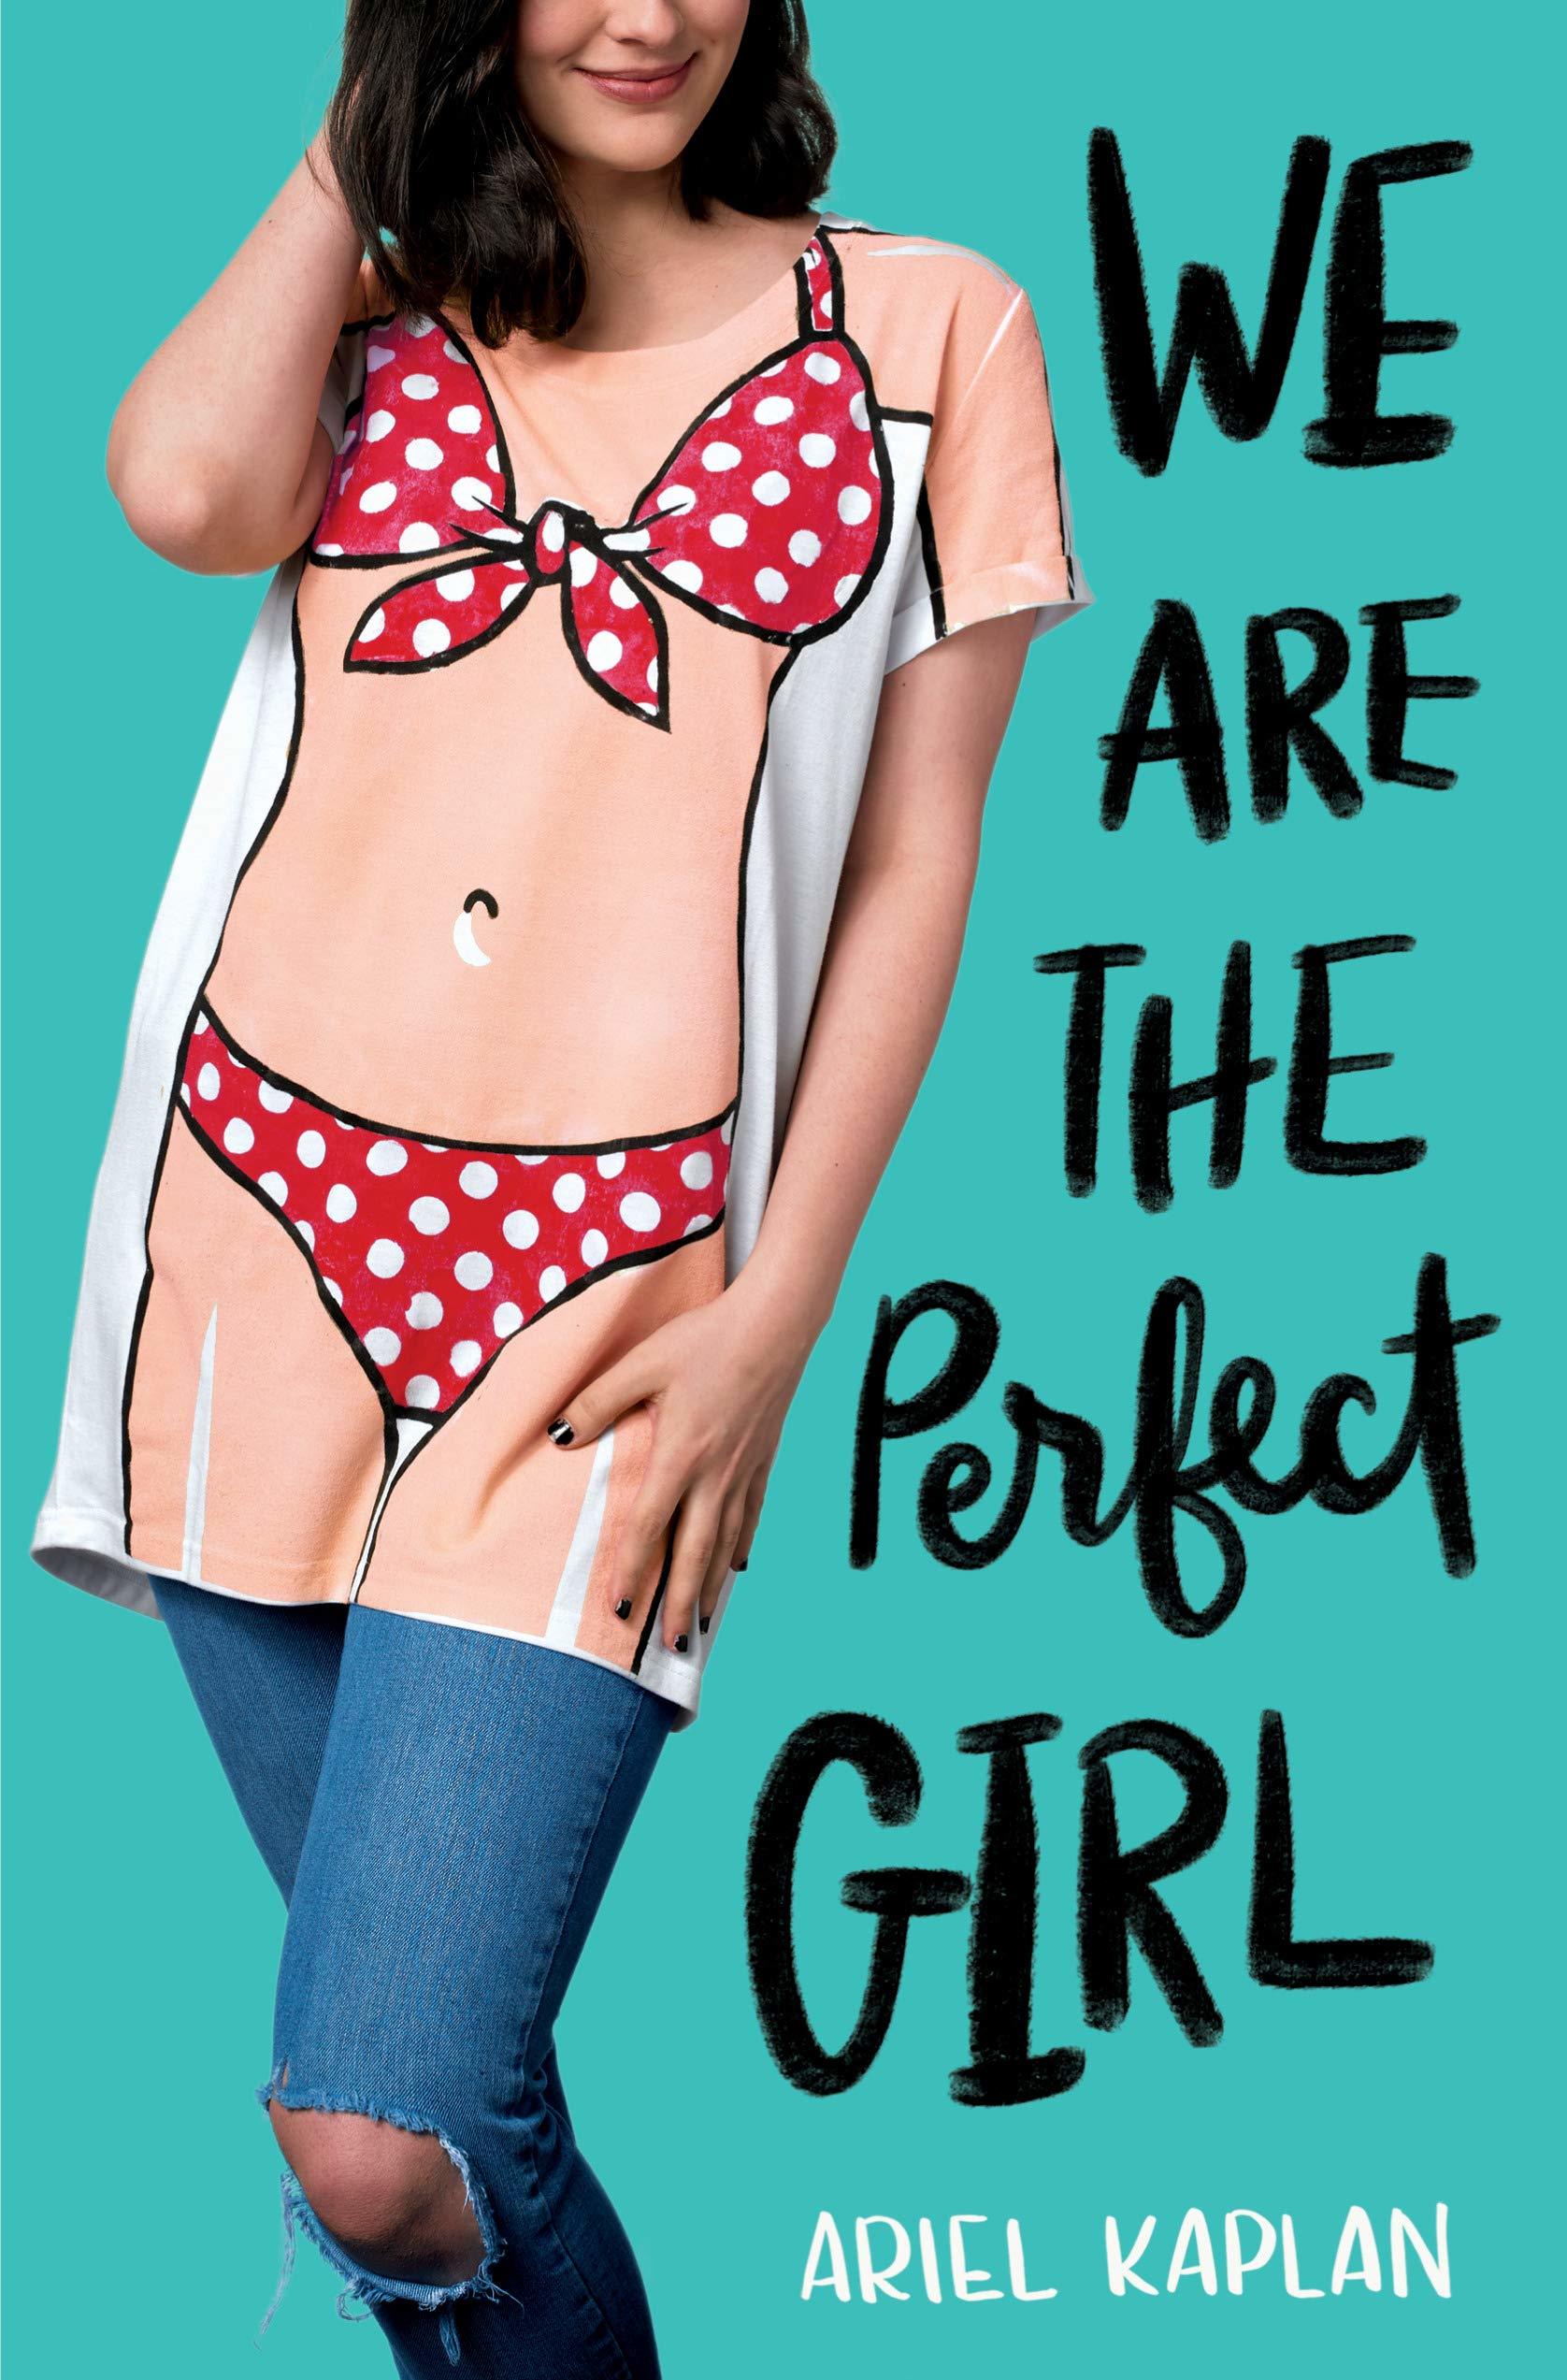 We Are the Perfect Girl - Ariel Kaplan